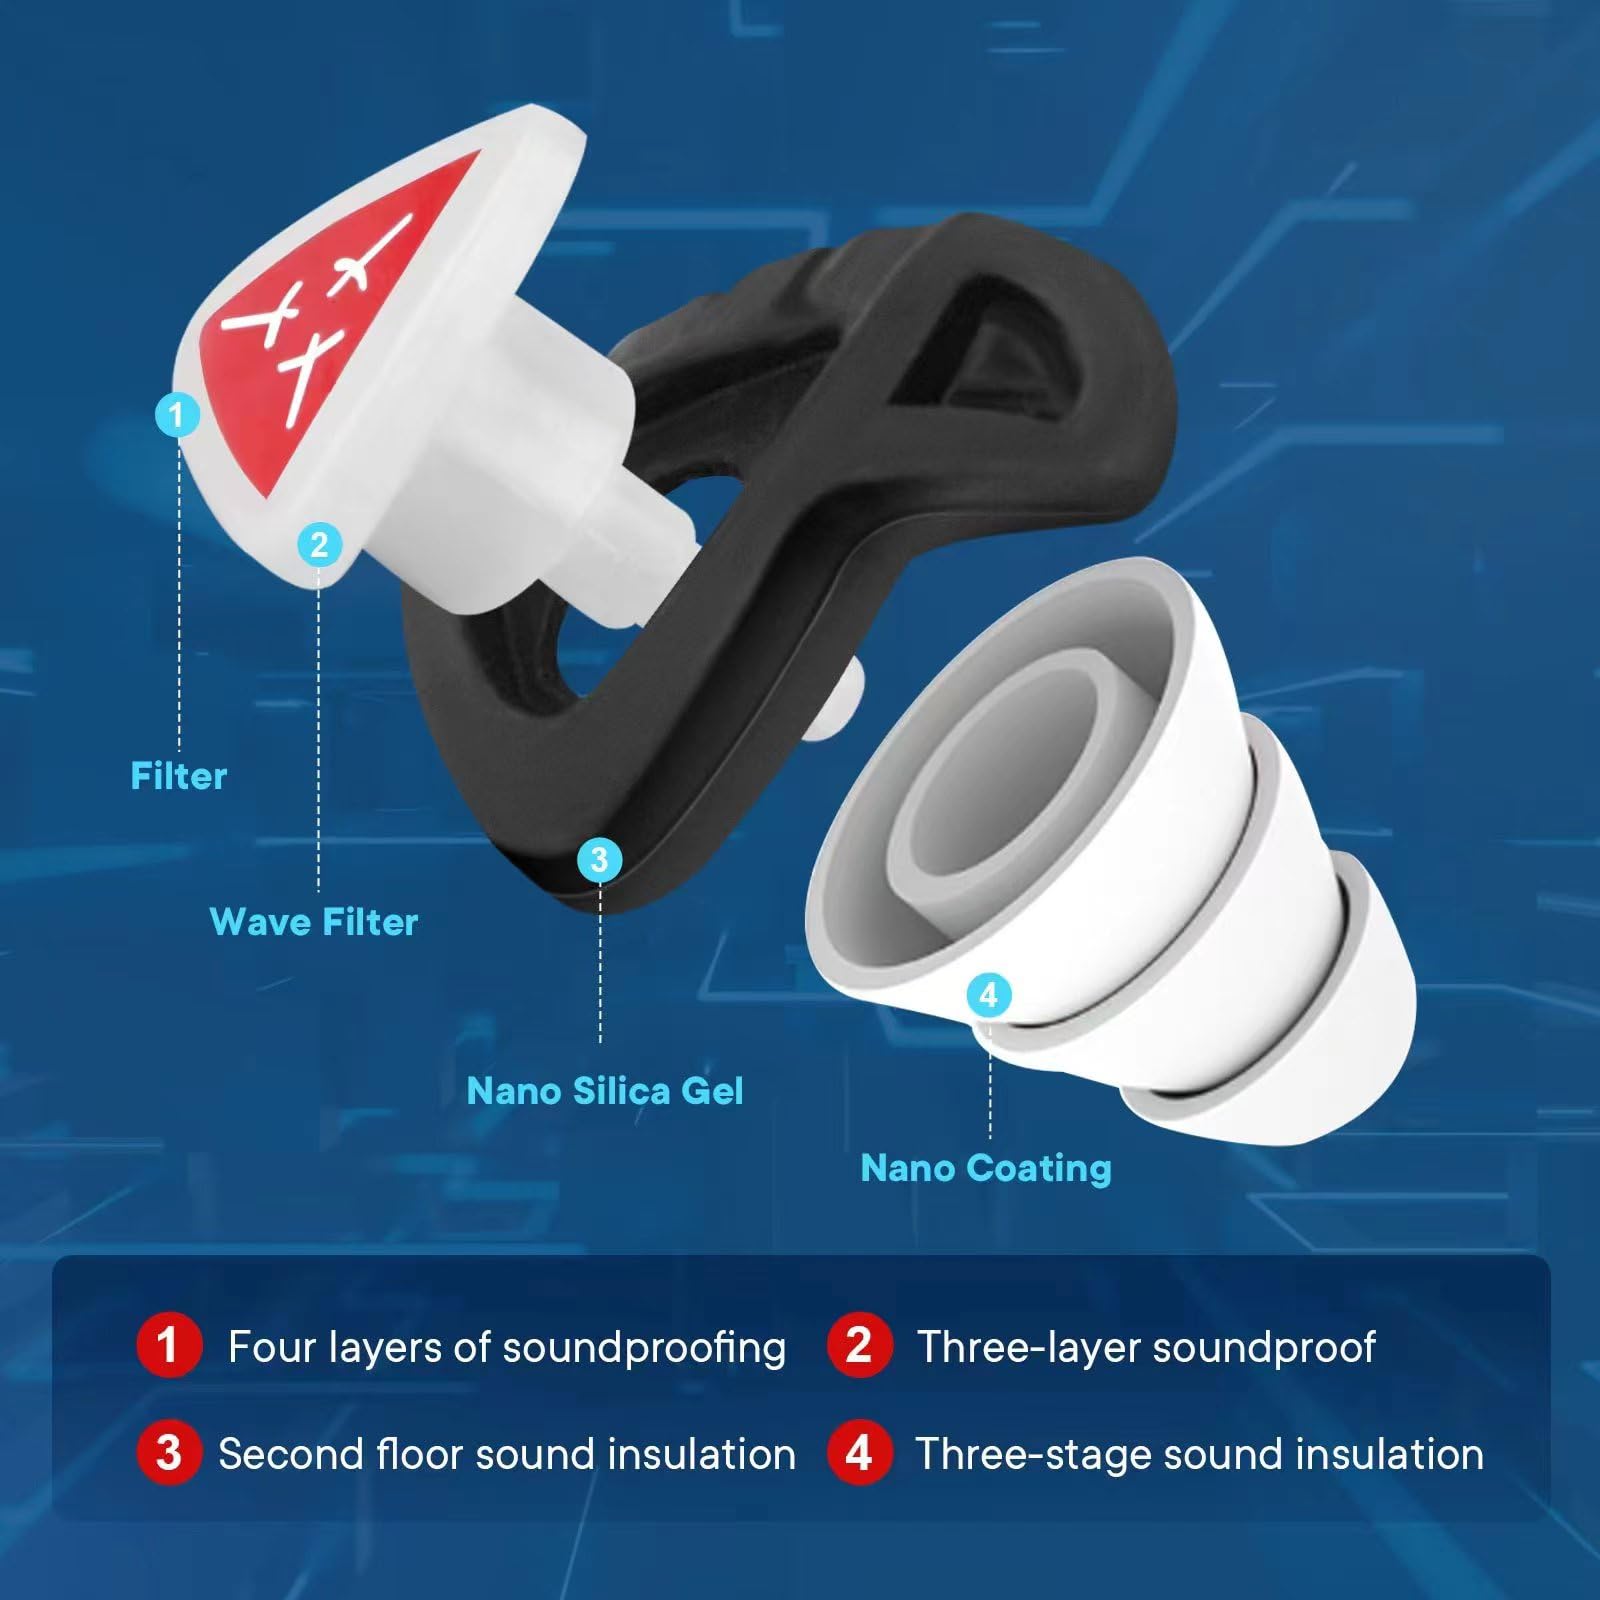 Ear Plugs for Sleeping Noise Cancelling Reusable Comfortable Silicone Earplugs,3 Pairs High Fidelity Concert Earplugs Noise Reduction Earplugs for Music Festivals, DJs, Musicians